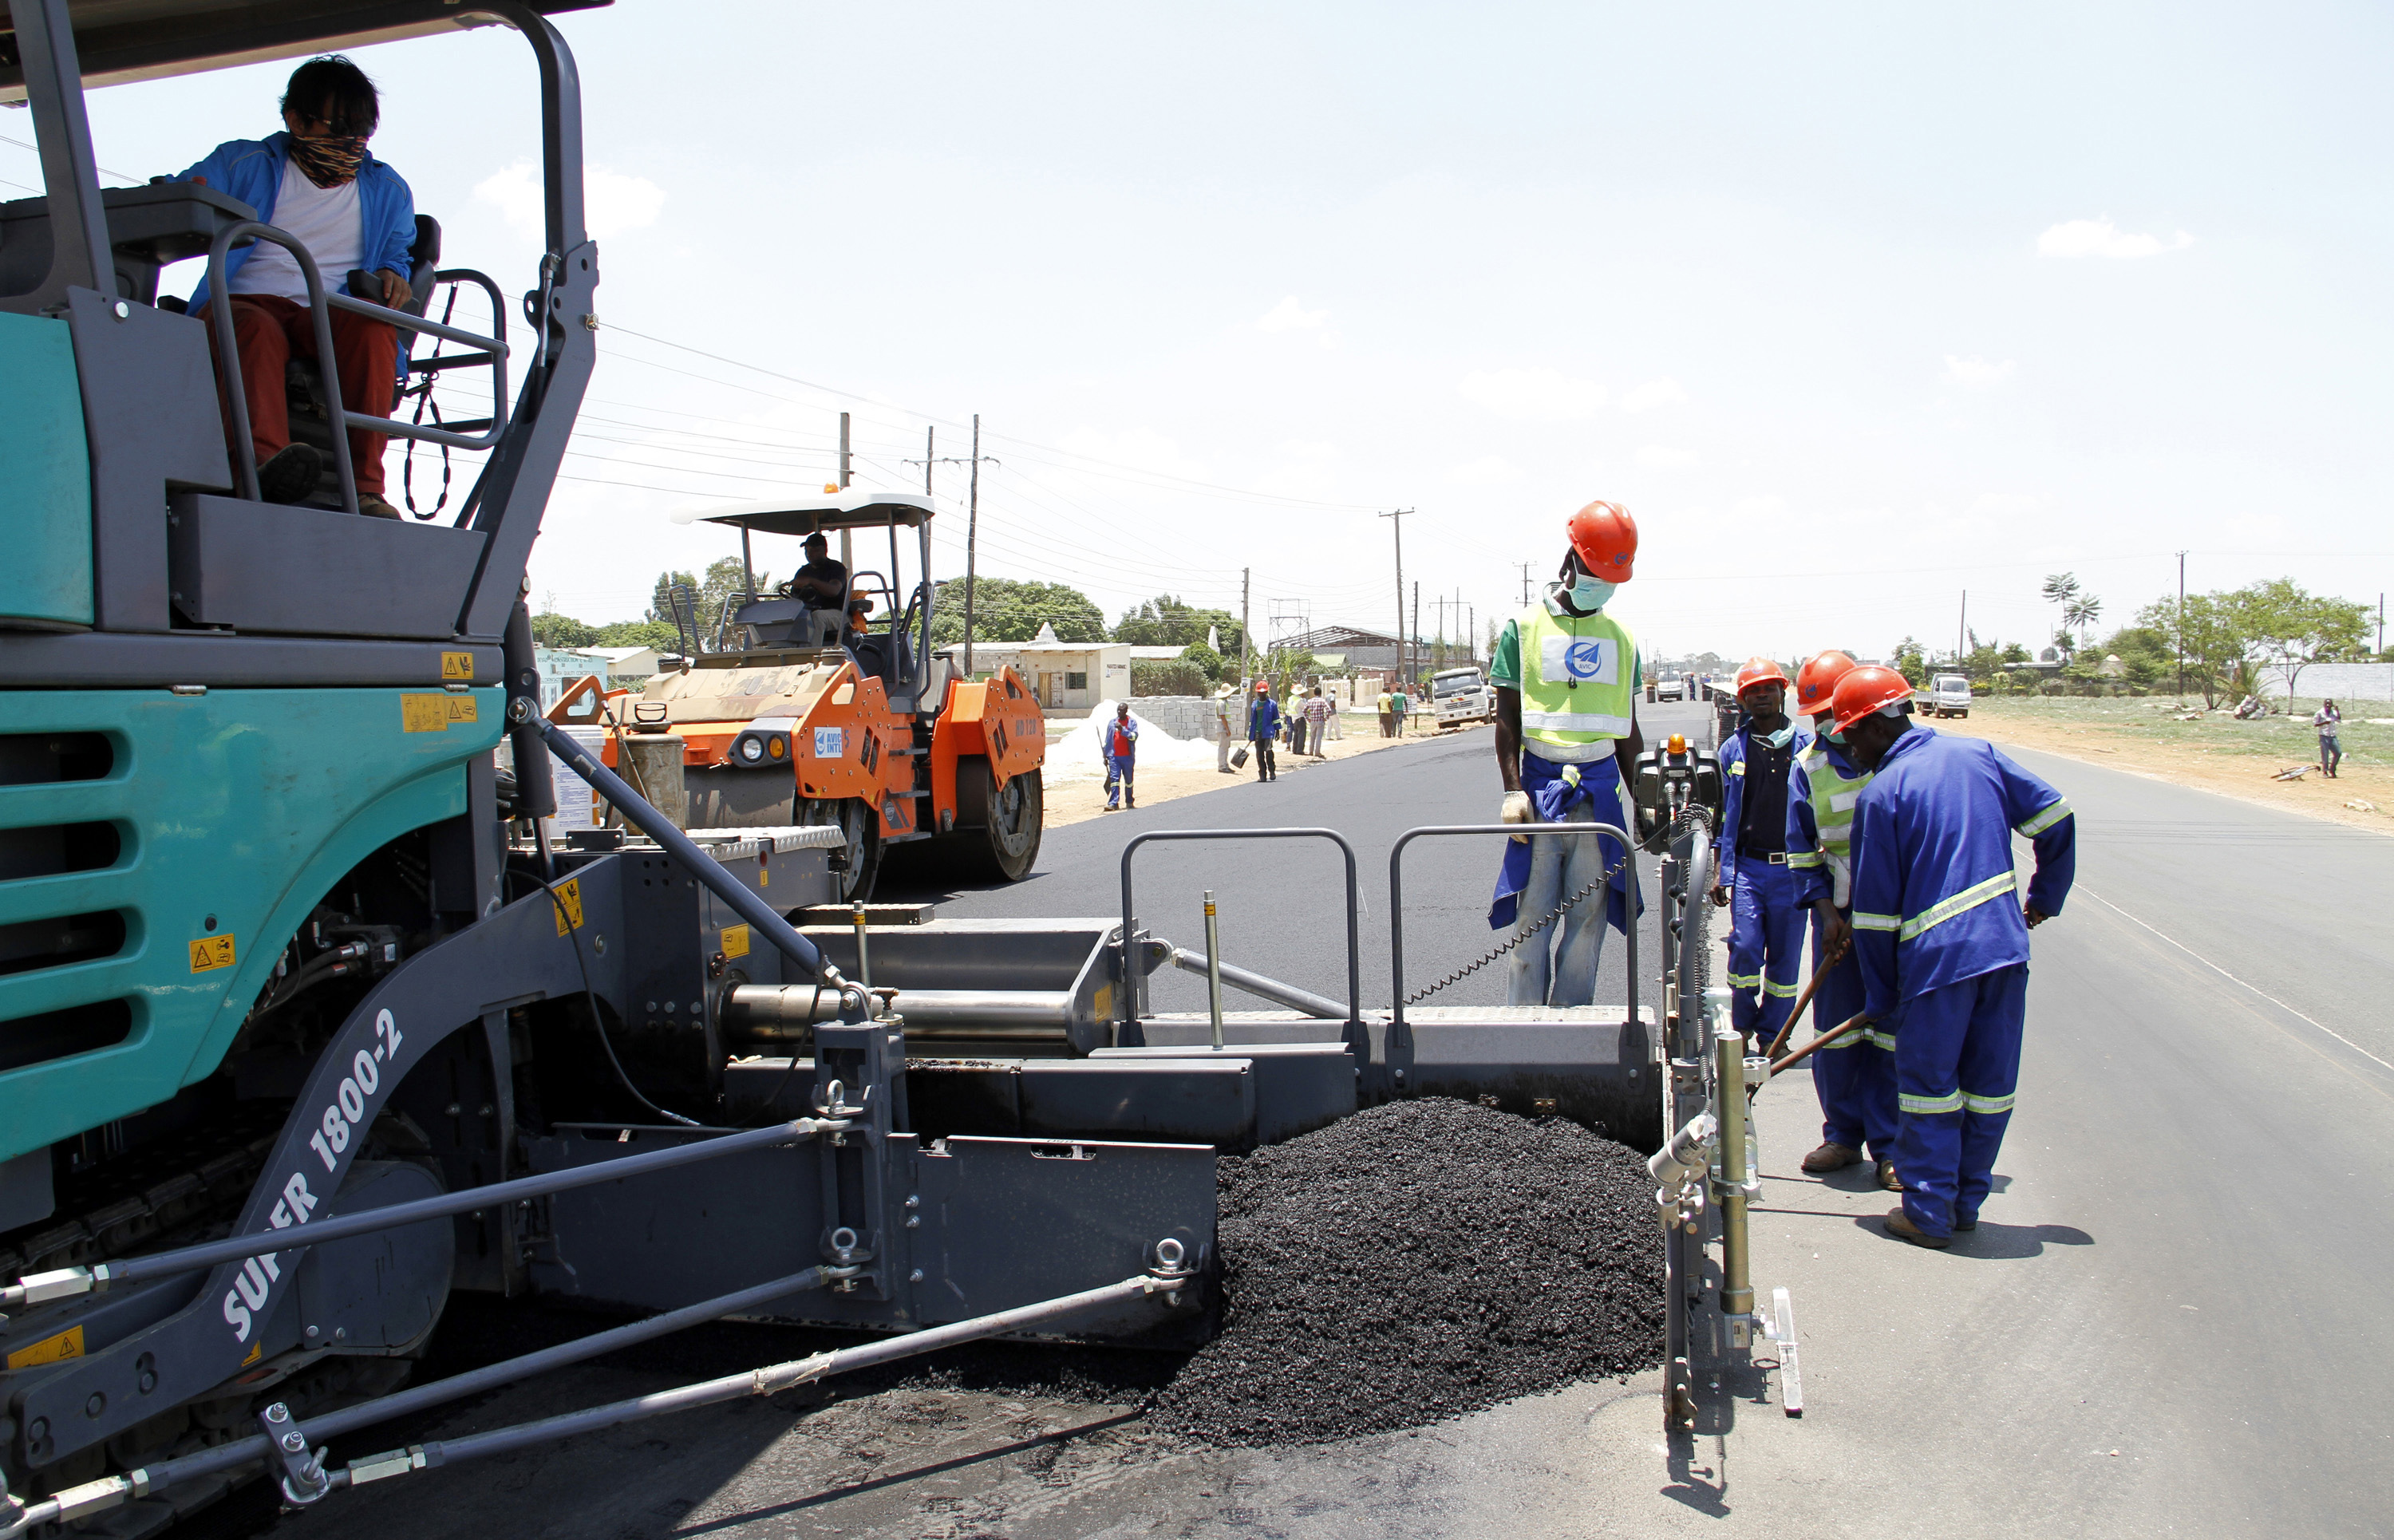 Labourers carry out surfacing work on a road near the Zambian capital Lusaka